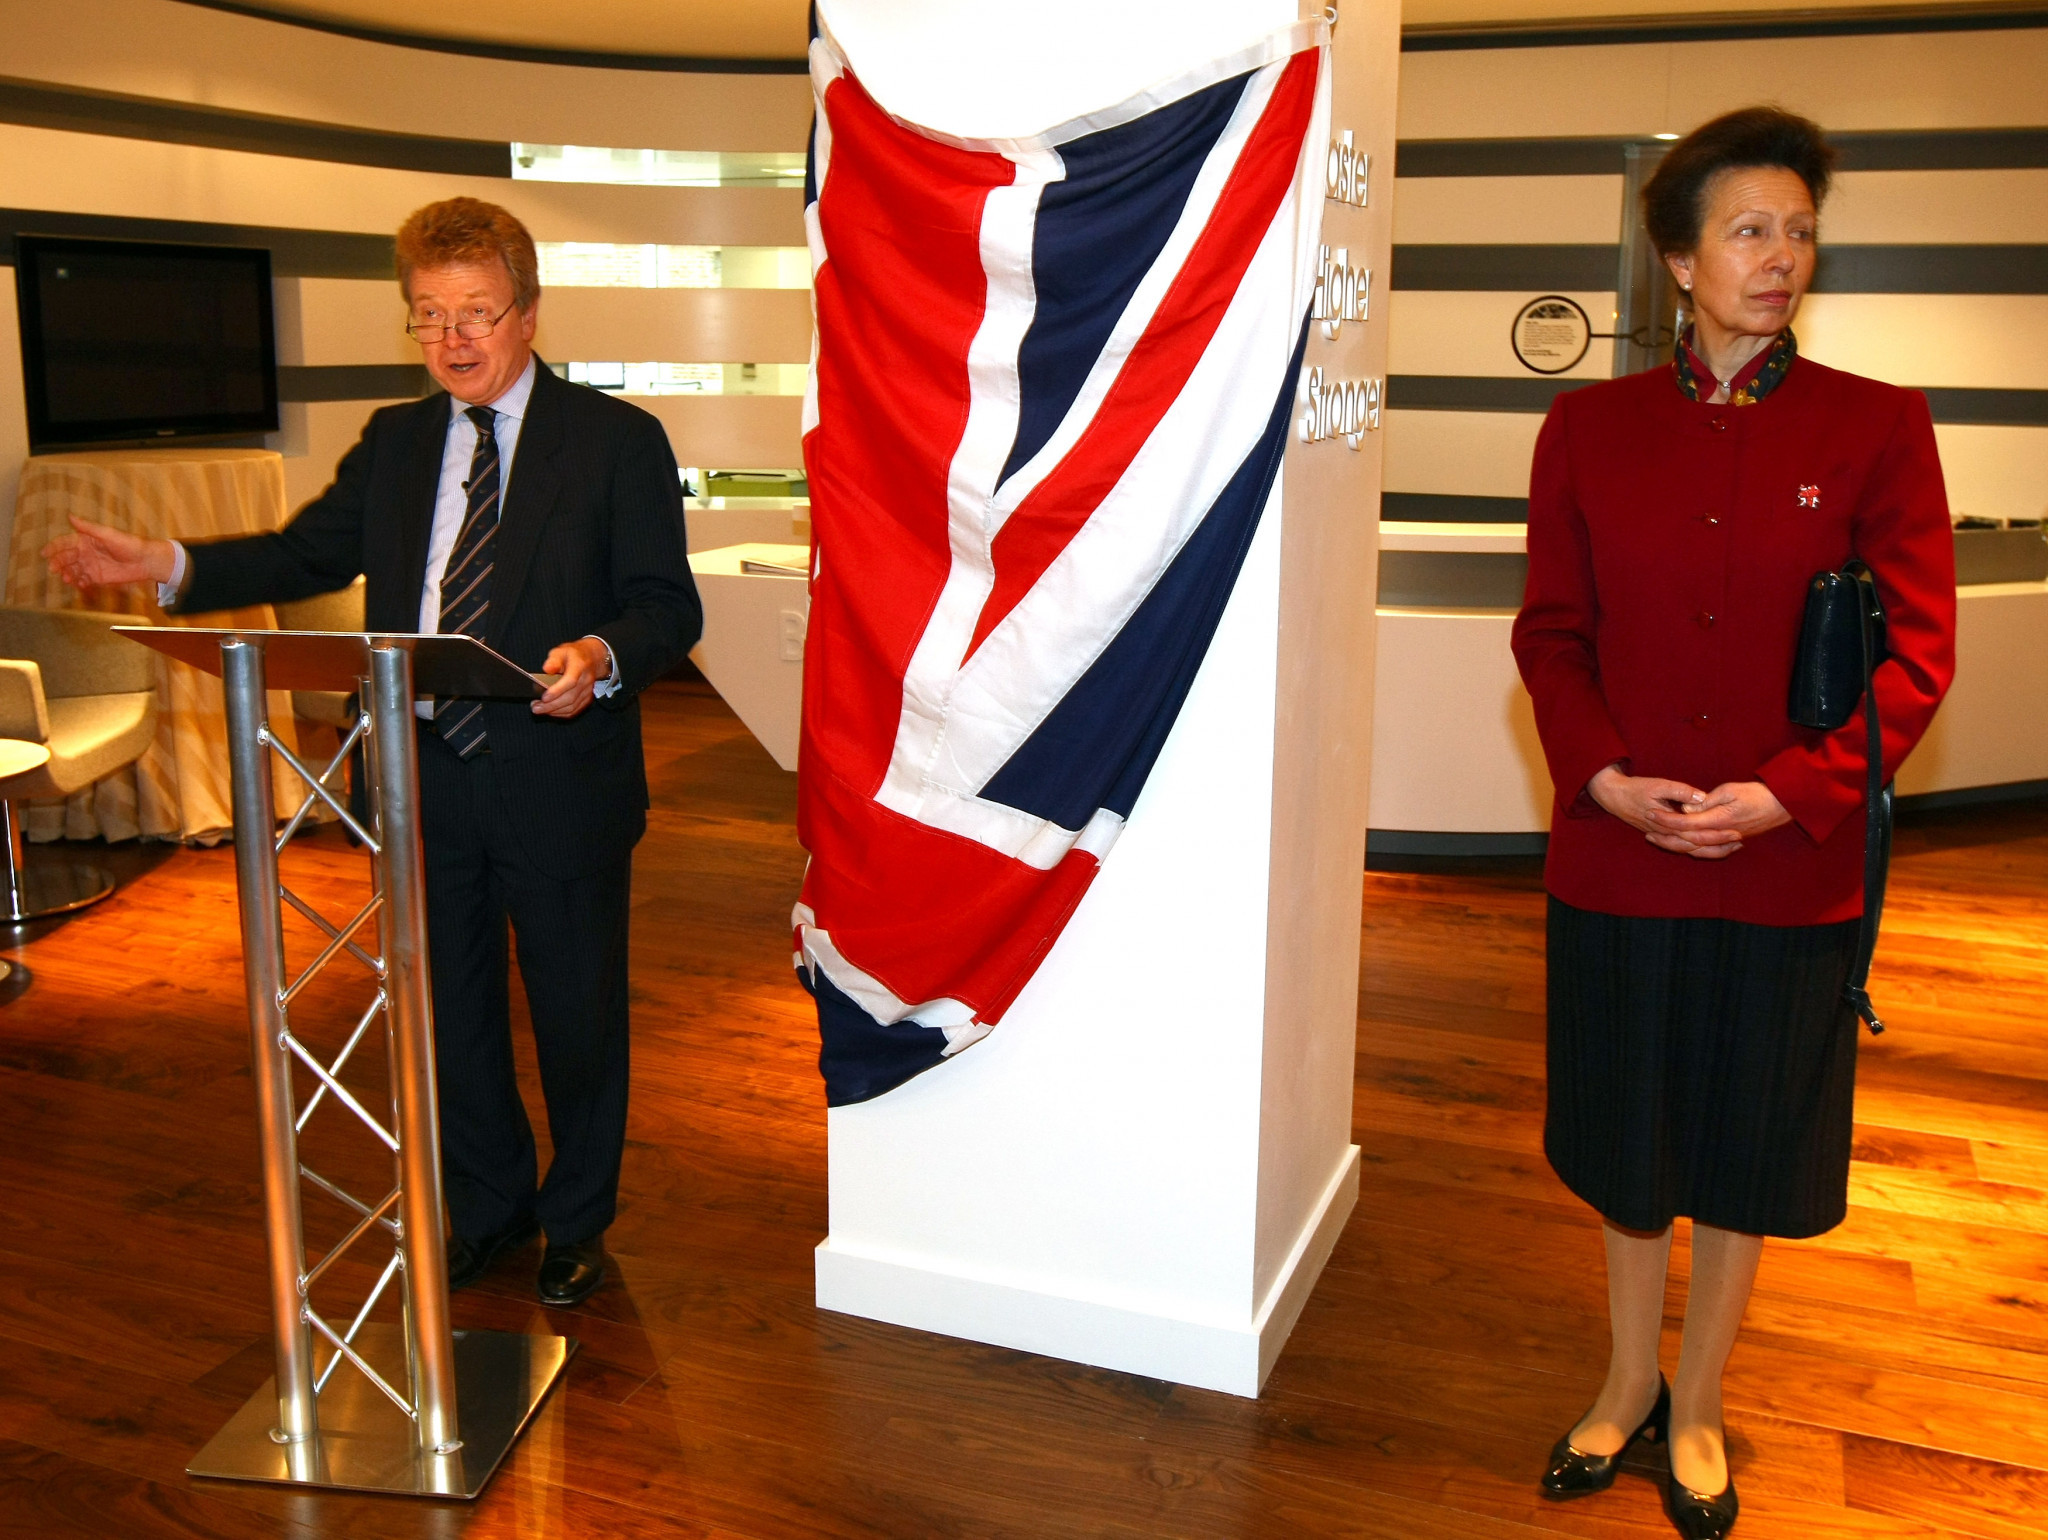 The British Olympic Association will leave their current London headquarters in Charlotte Street, where they have been based since 2009 when the Princess Royal officially opened them ©Getty Images